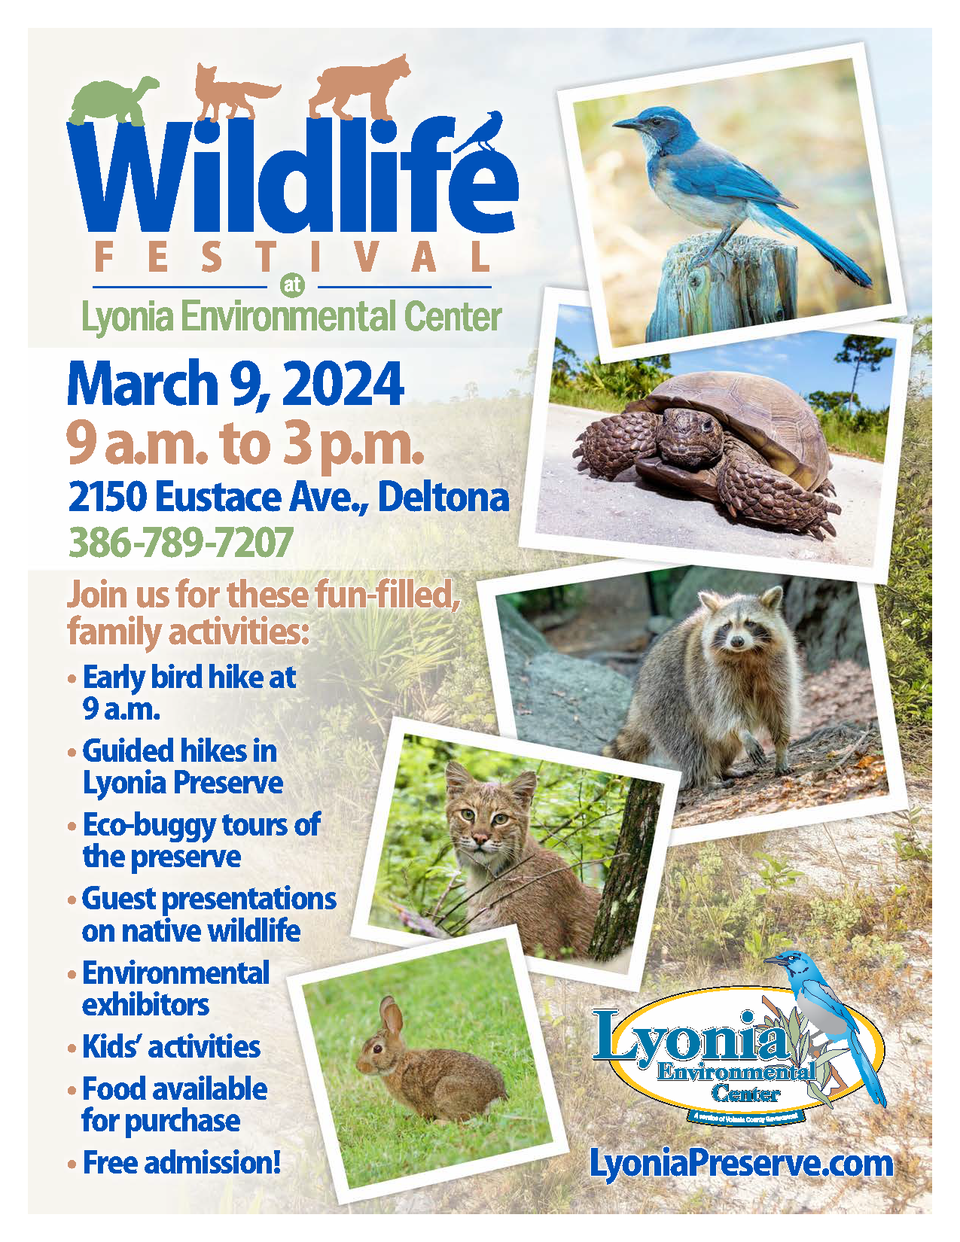 Deltona Wildlife Festival: A Day of Adventure for All Ages